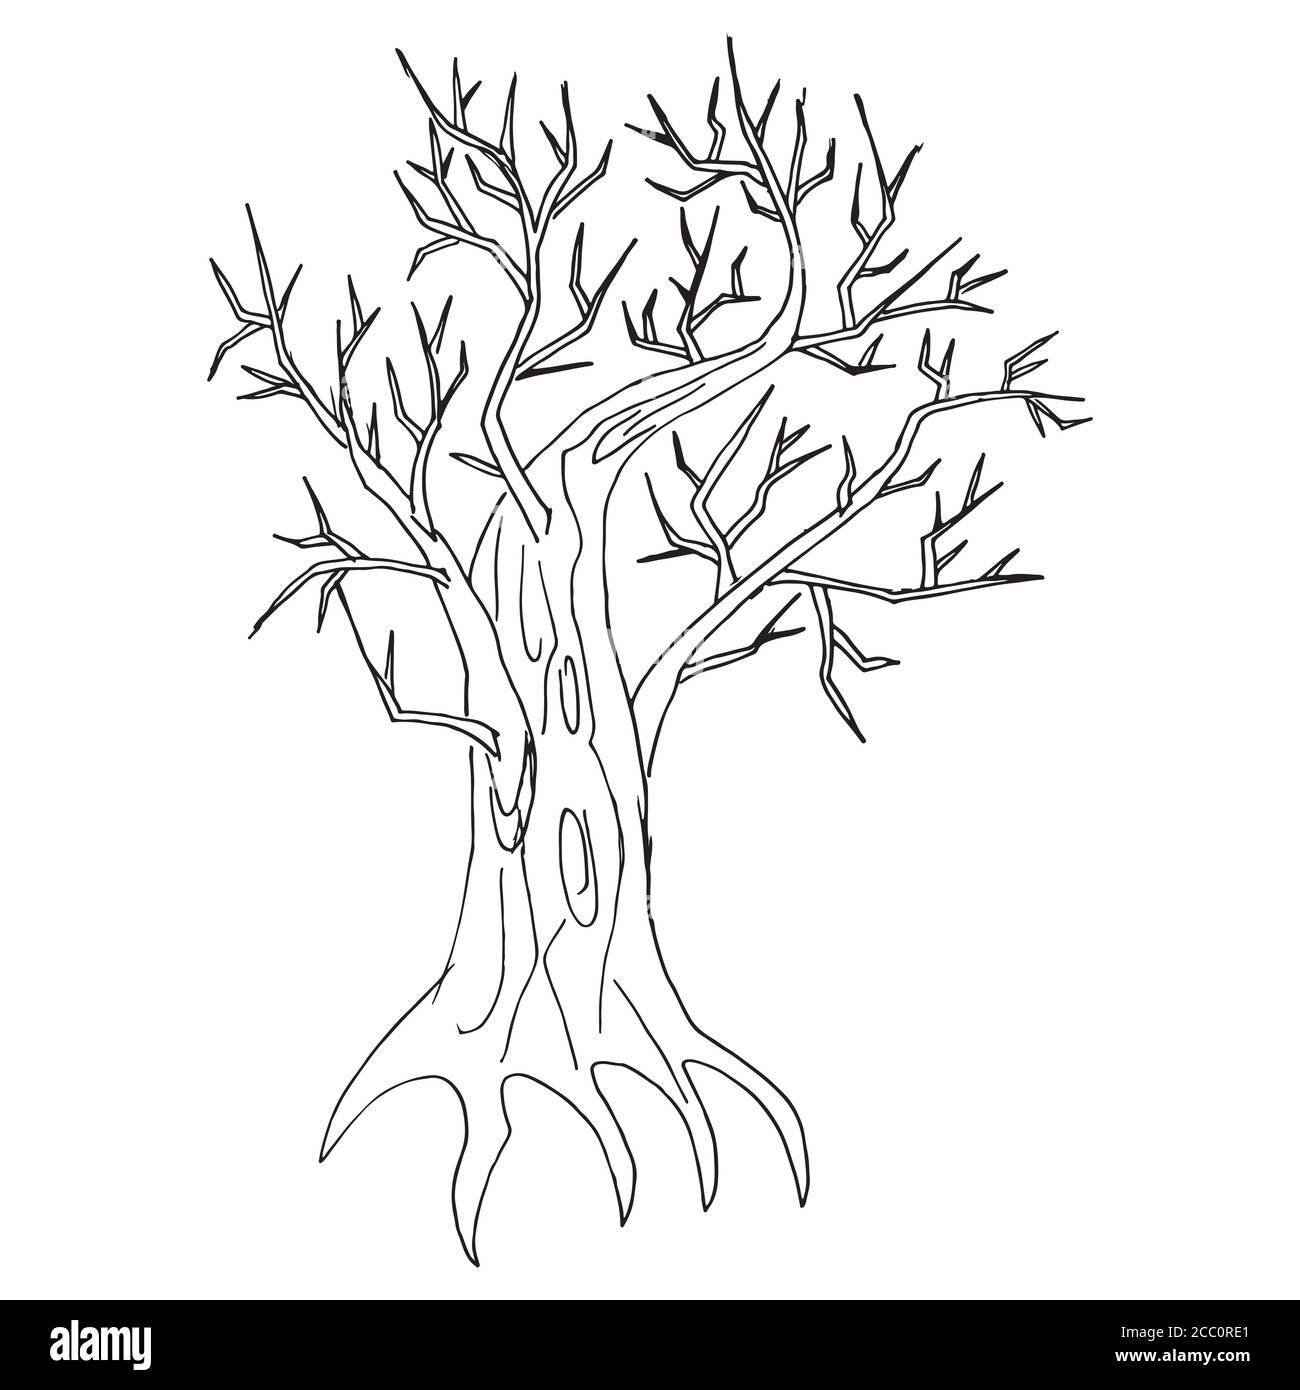 Handsketched old crooked tree, Halloween. Dry wood, tinder. Deciduous oaktree vintage ink sketch. Freehand linear picture in retro doodle graphic Stock Vector